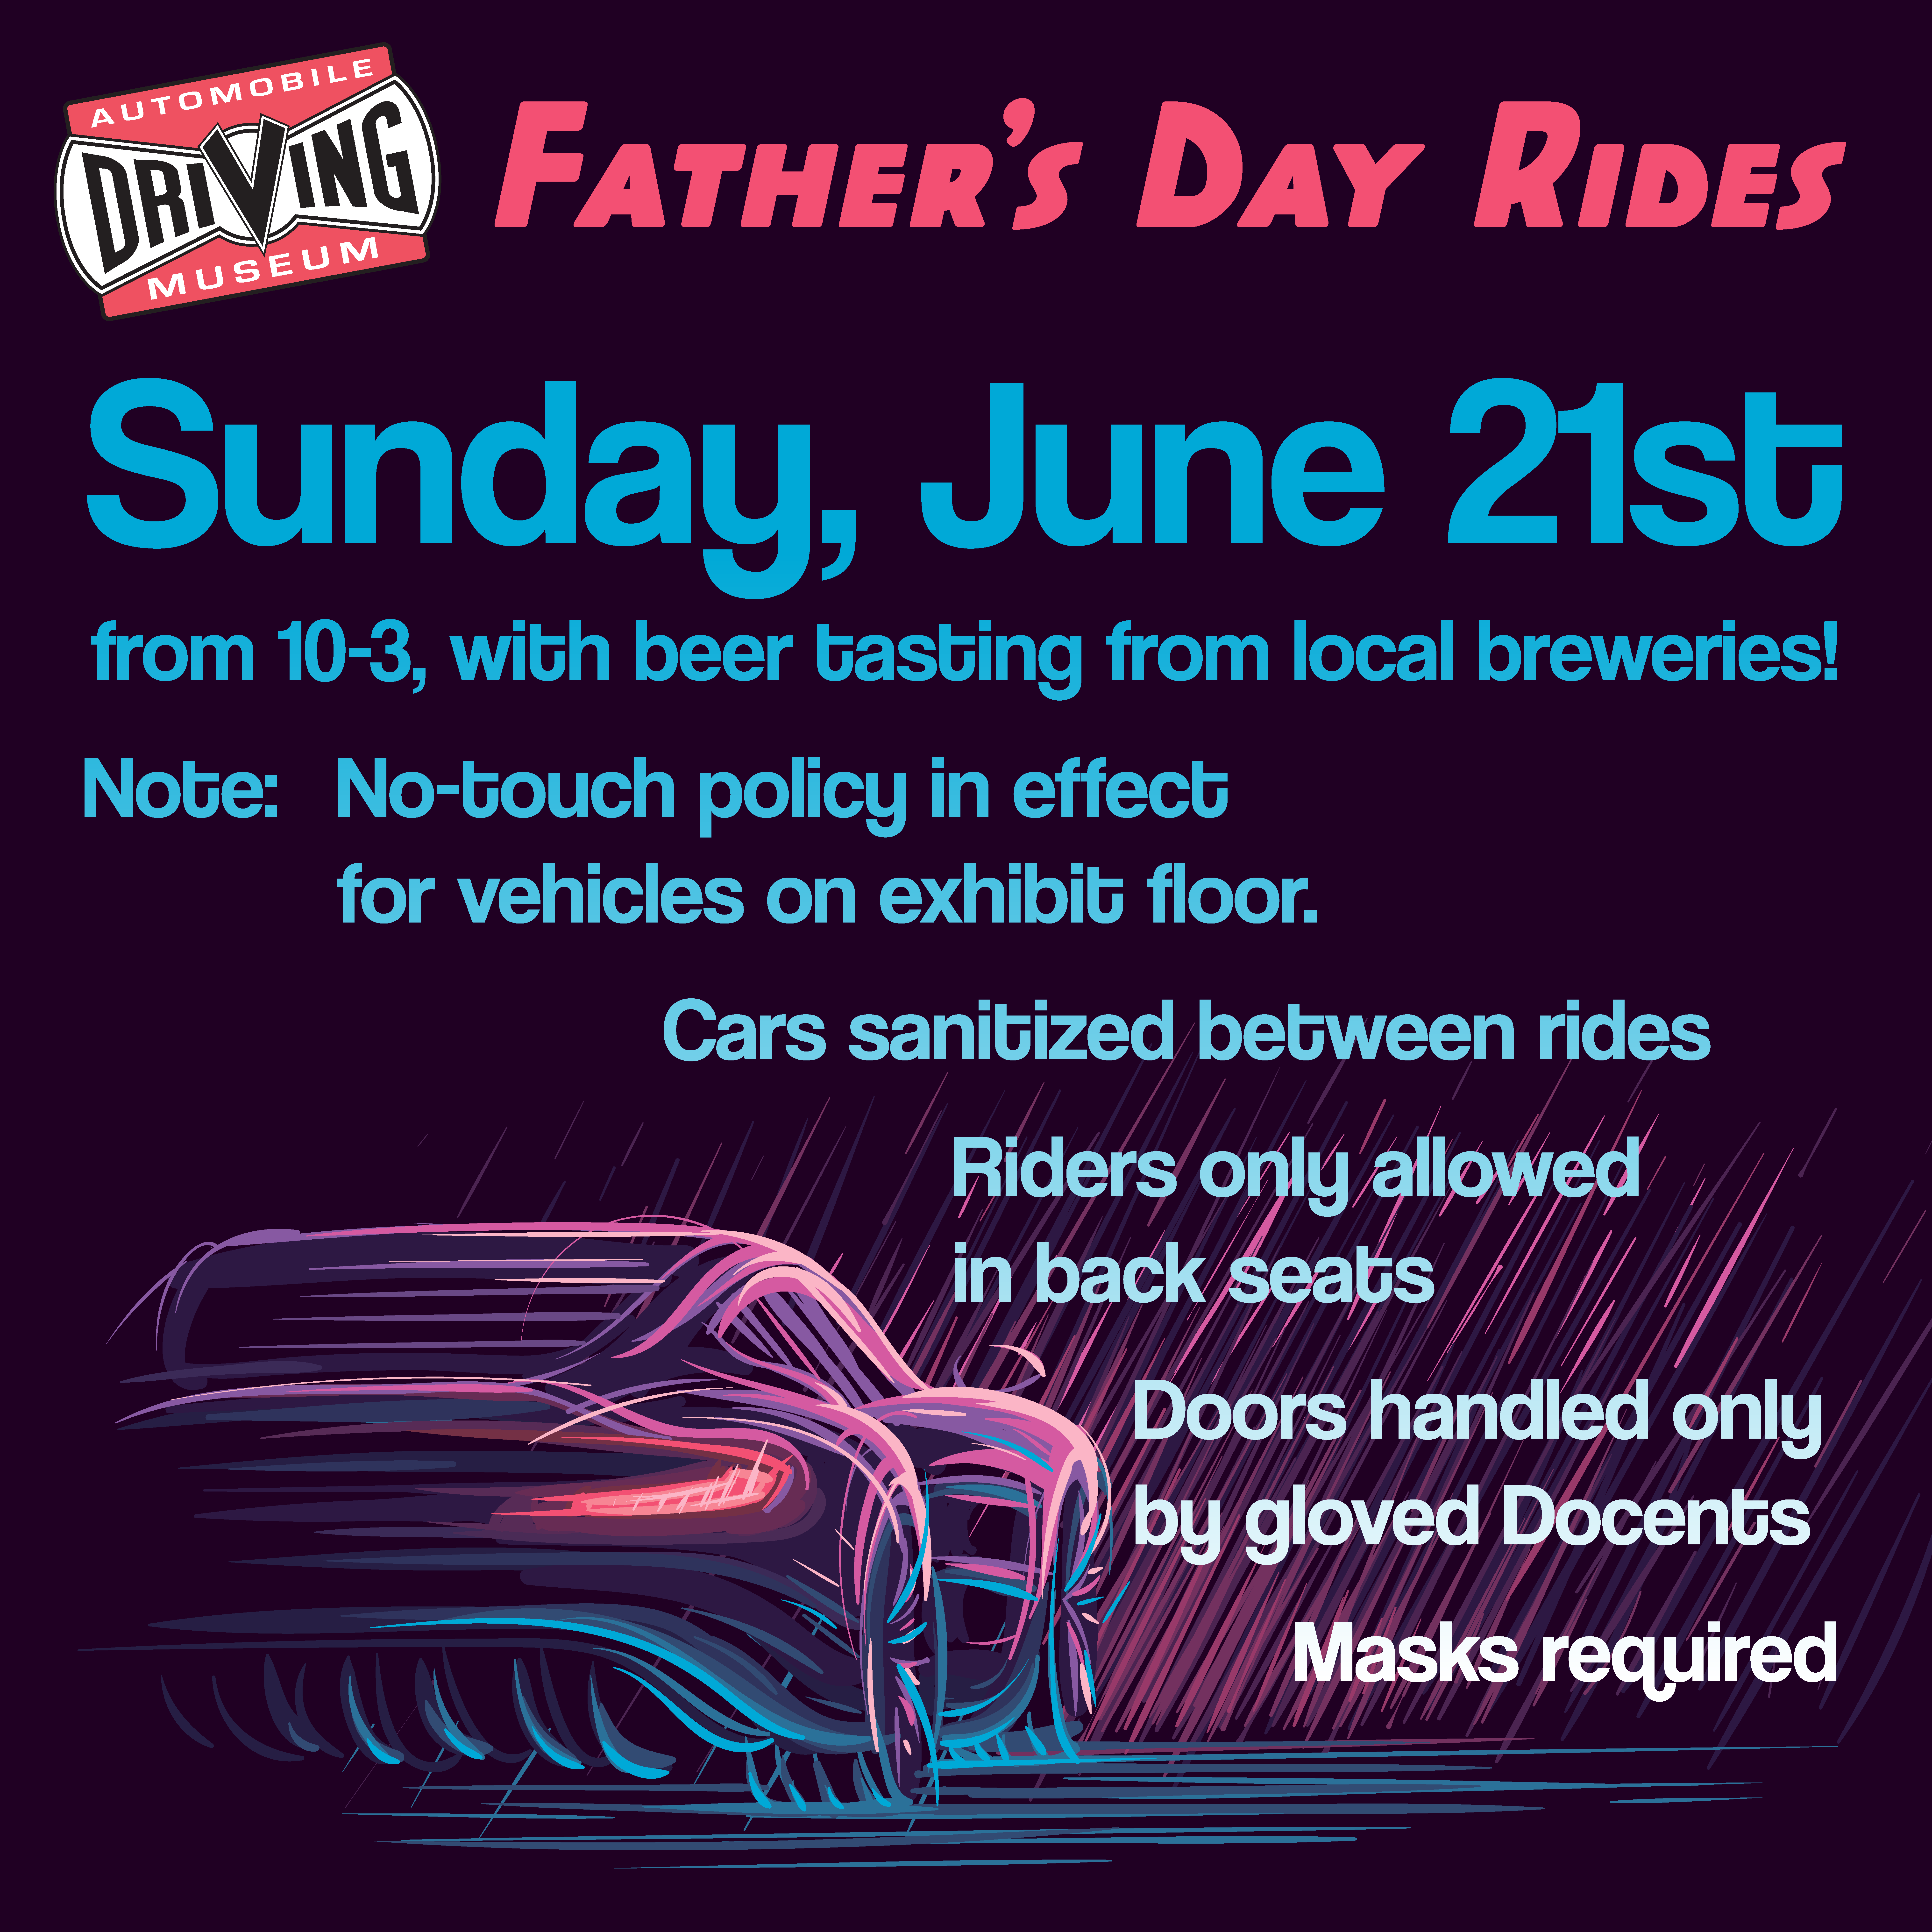 Father's day rides at the ADM